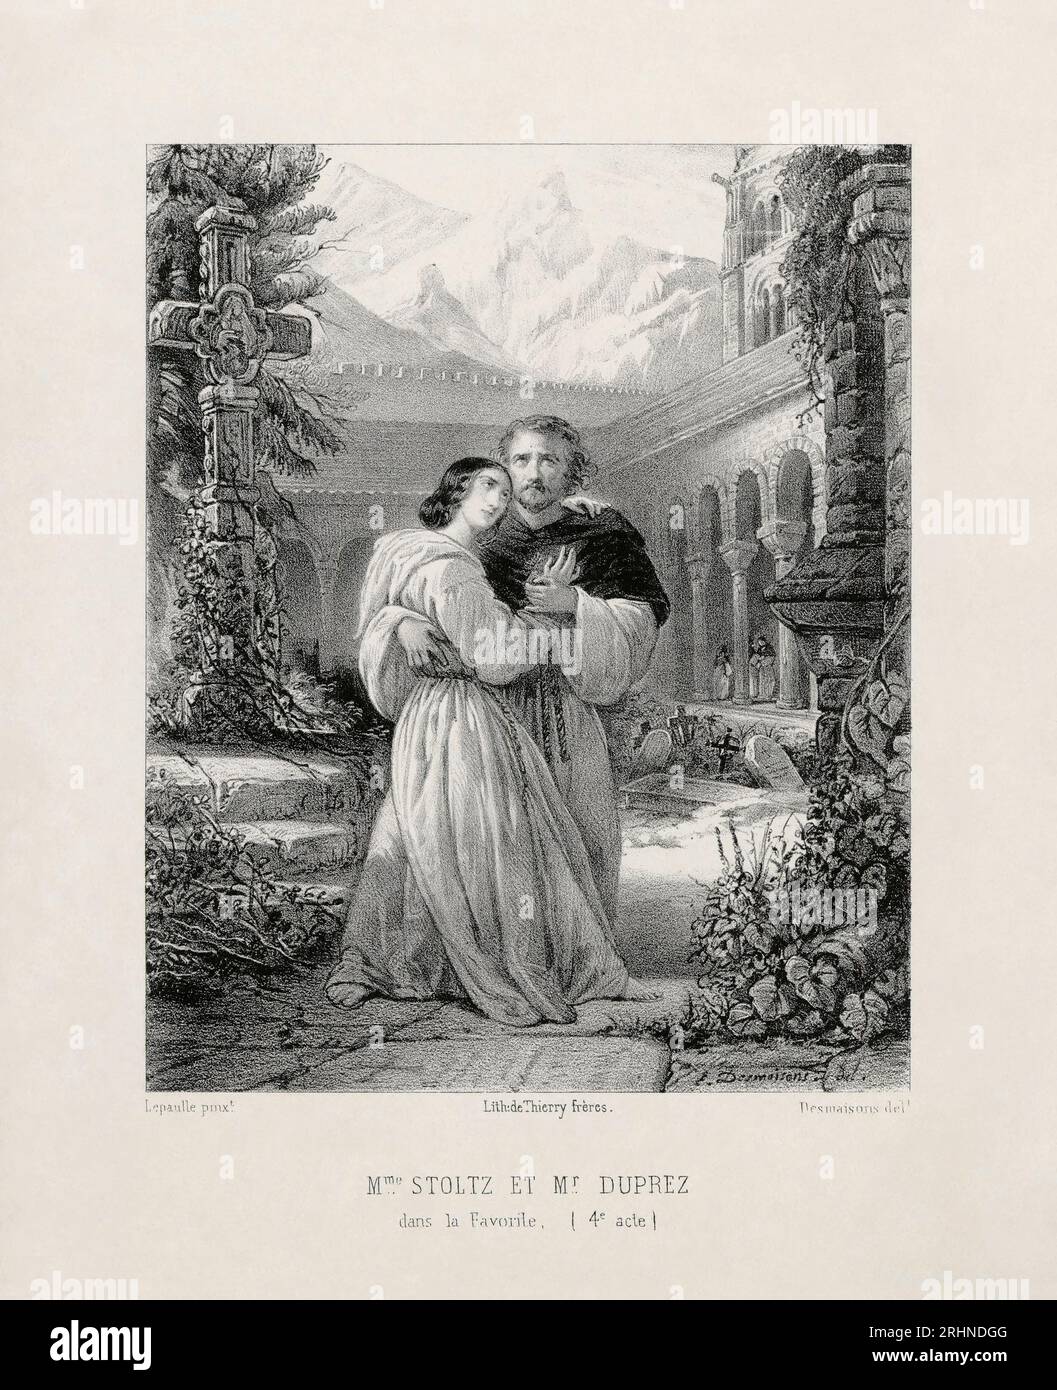 Gilbert Duprez und Rosine Stoltz as Fernand and Léonor in the Opera La favorite by Gaetano Donizetti at the Paris Opera. Museum: PRIVATE COLLECTION. Author: EMILE DESMAISONS. Stock Photo